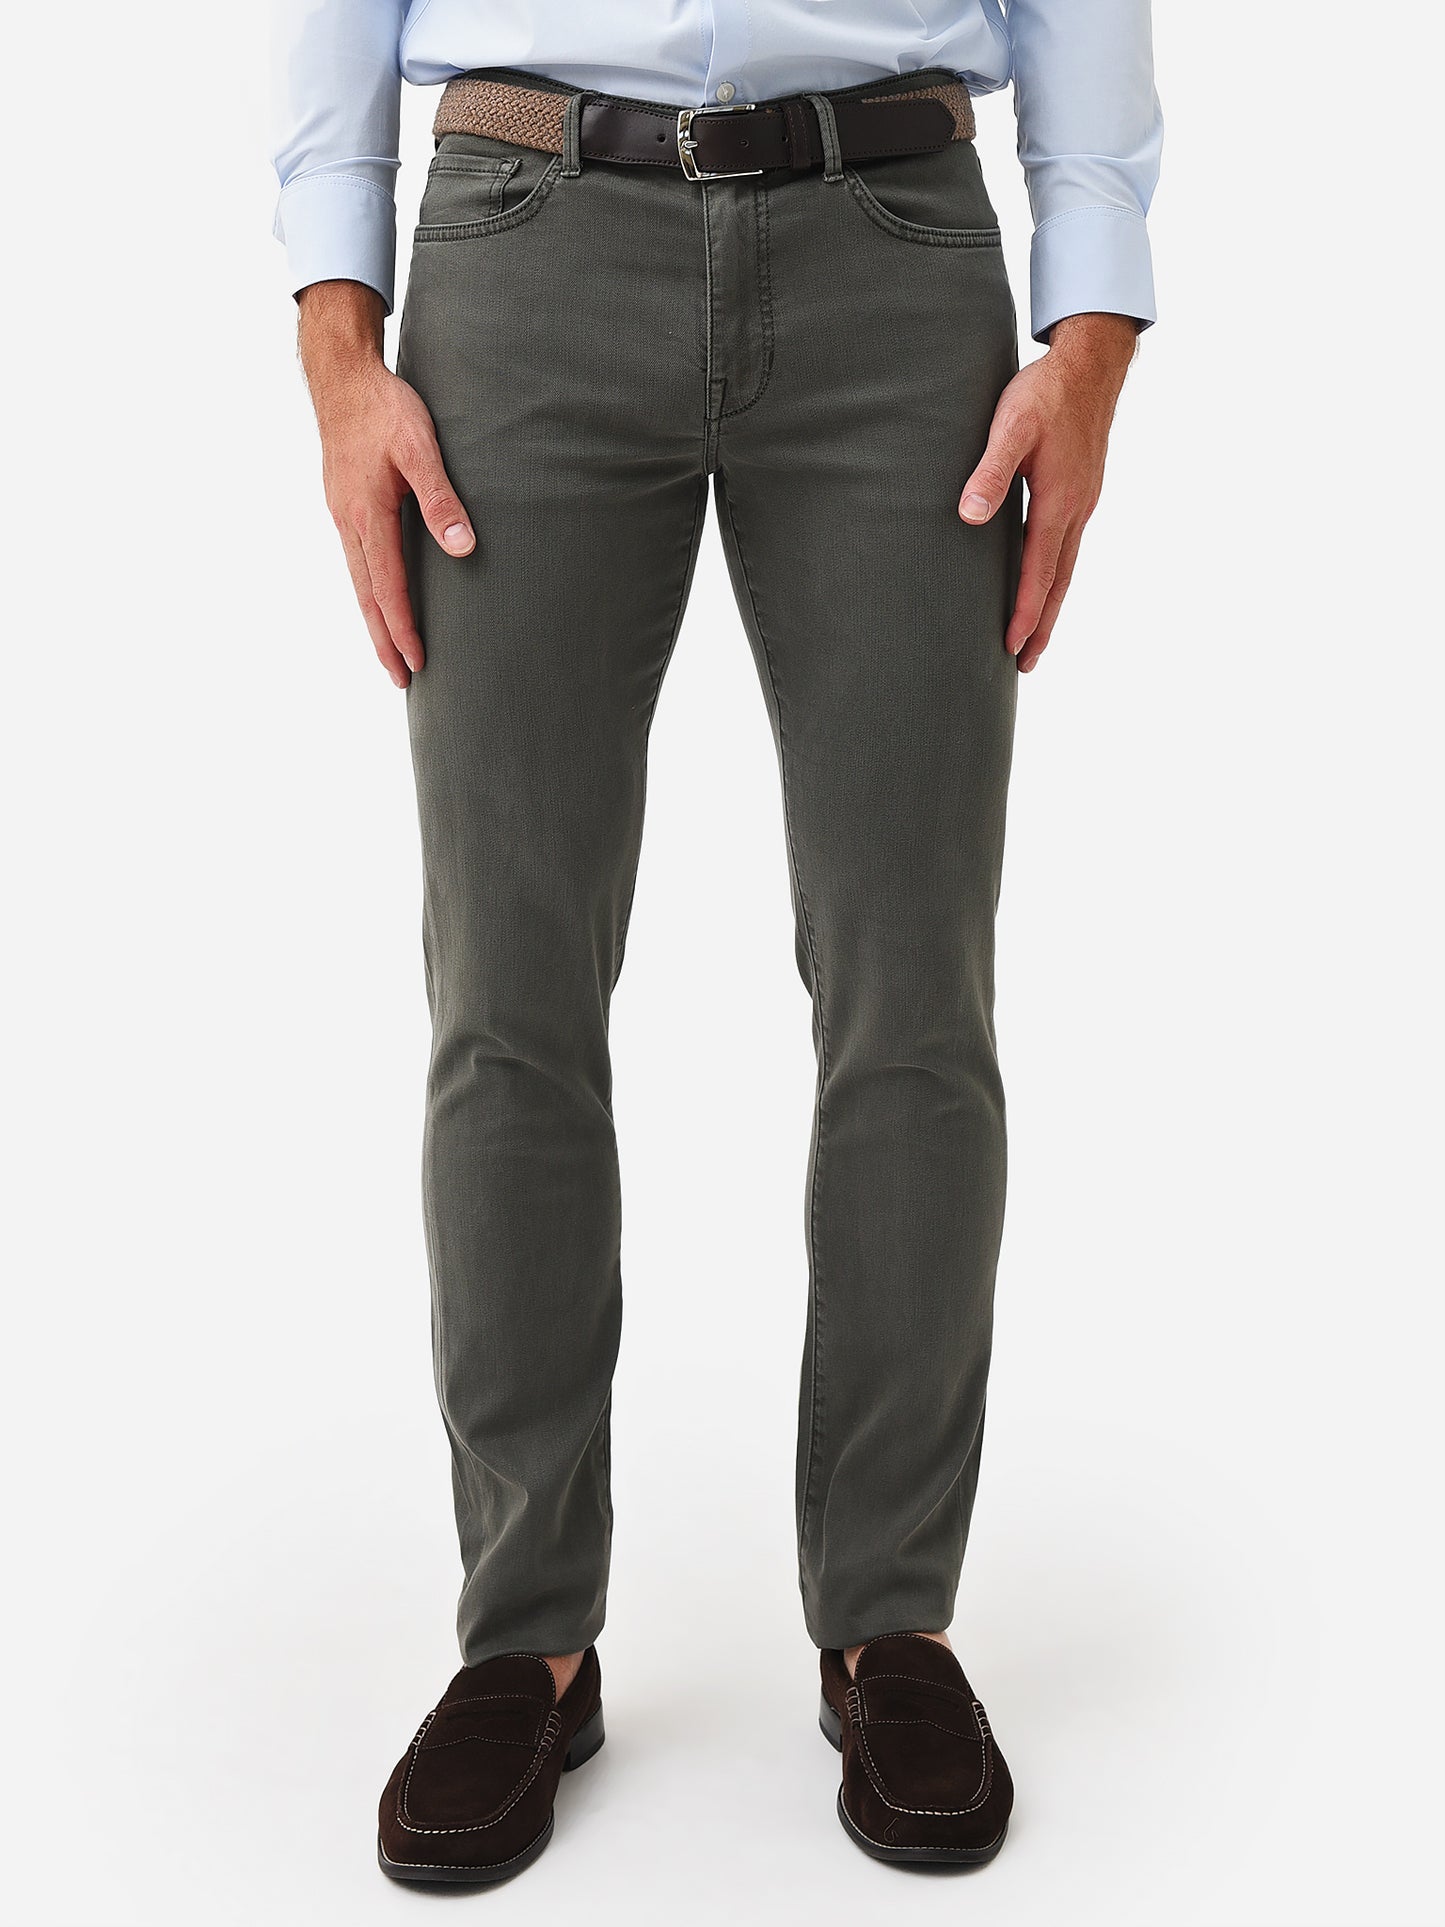 Joes Men's The Asher Twill Pant